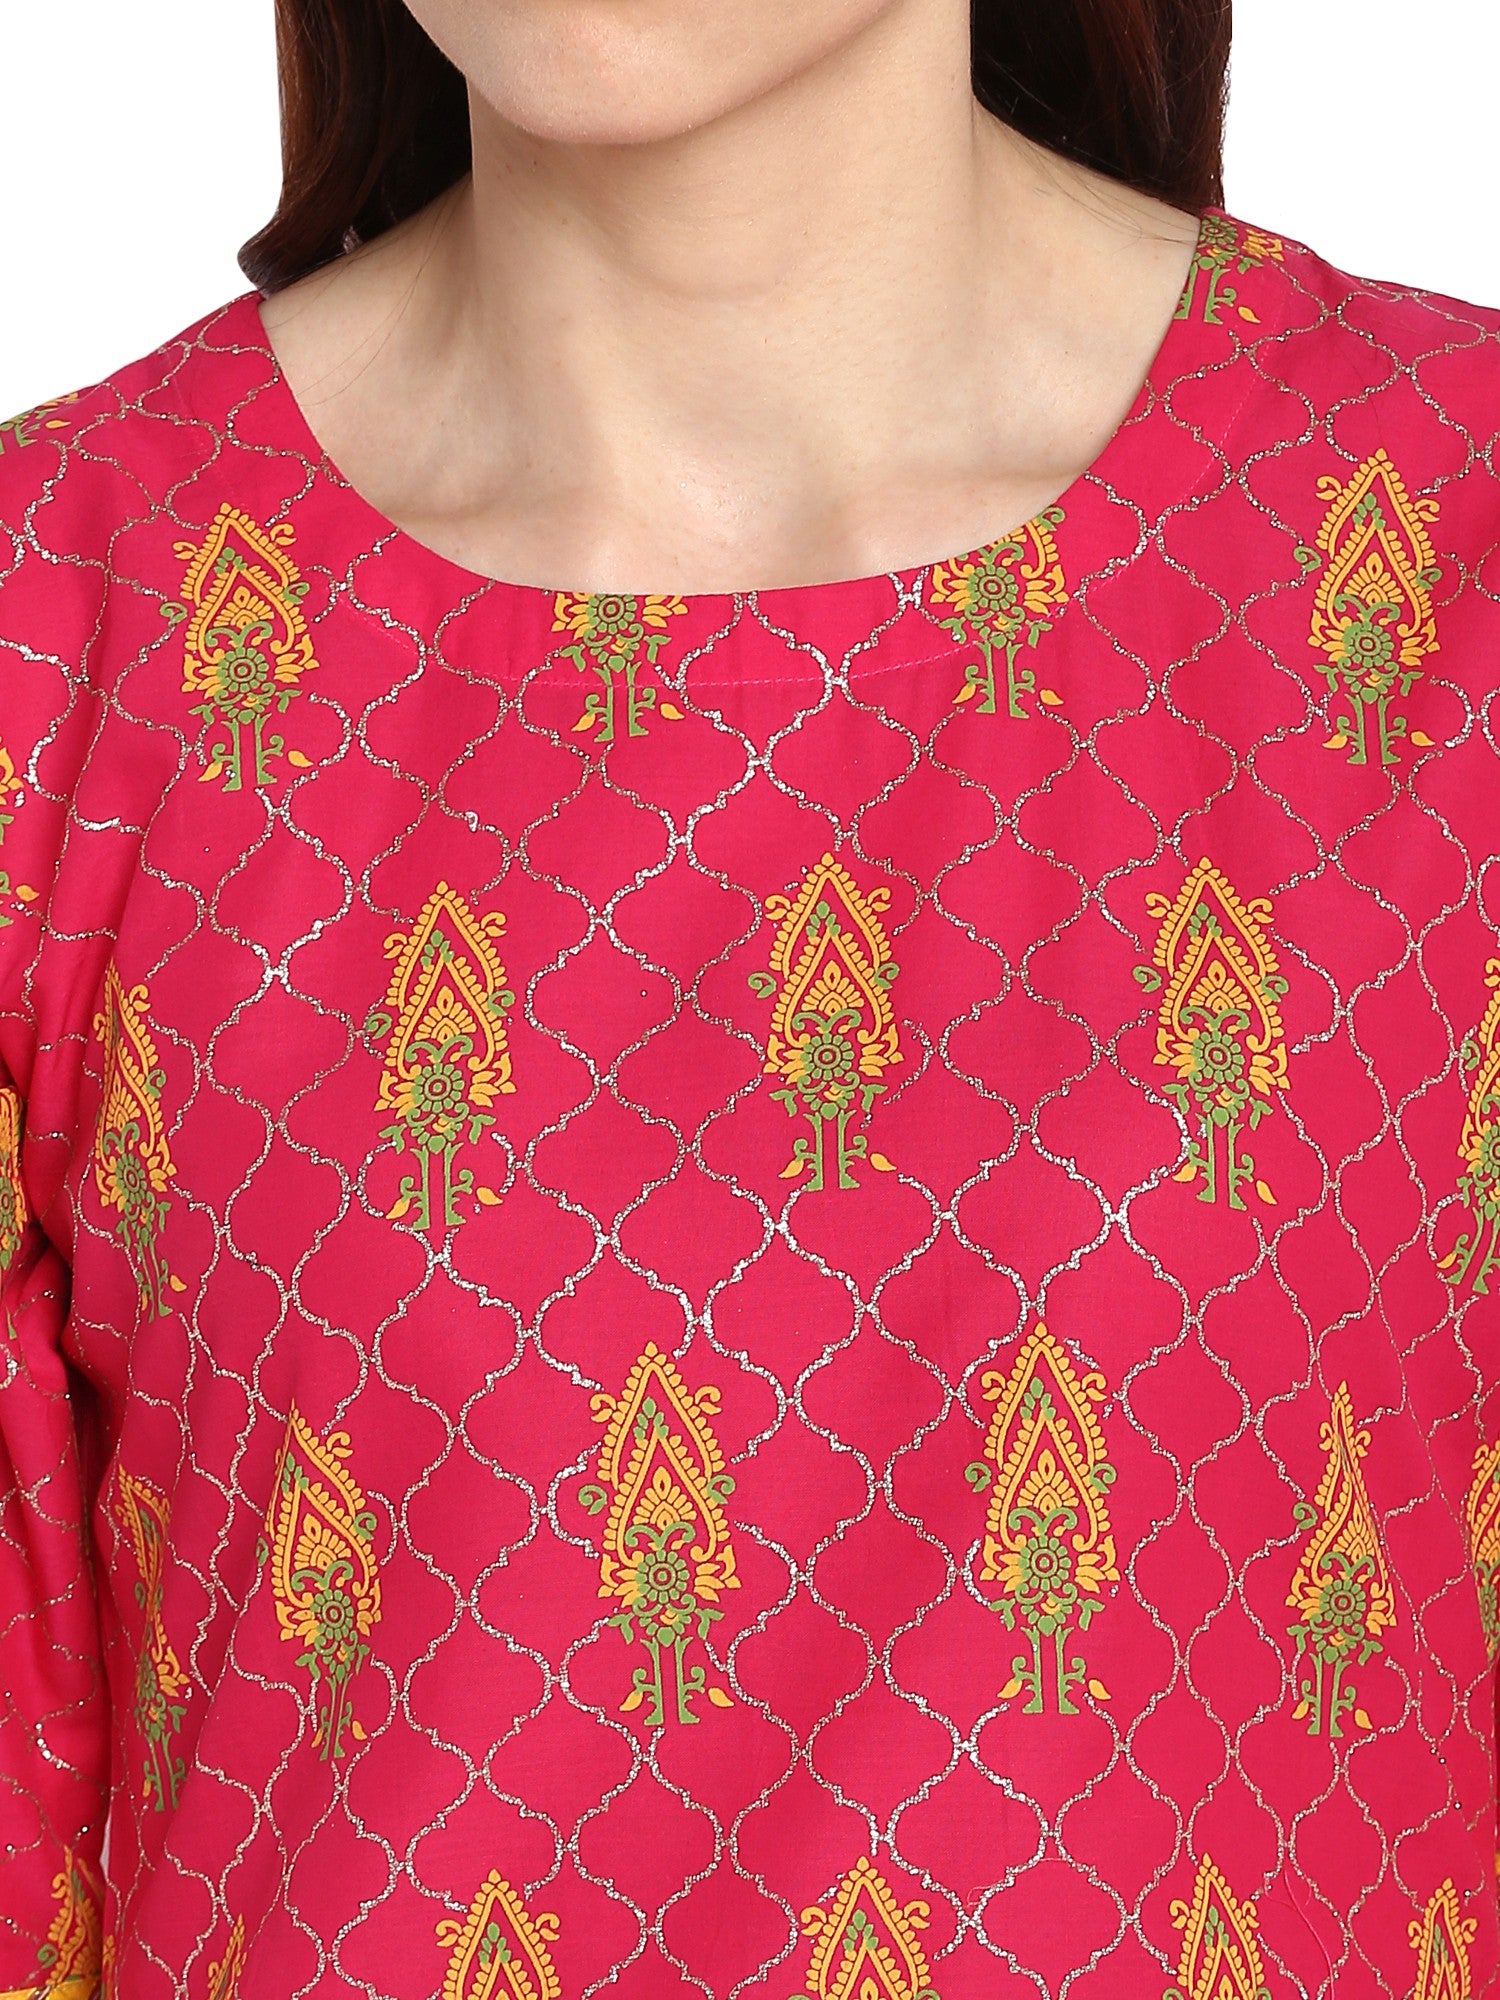 Women's Pink Cotton Only Kurta With Fit & Flare Sleeves - Ahalyaa